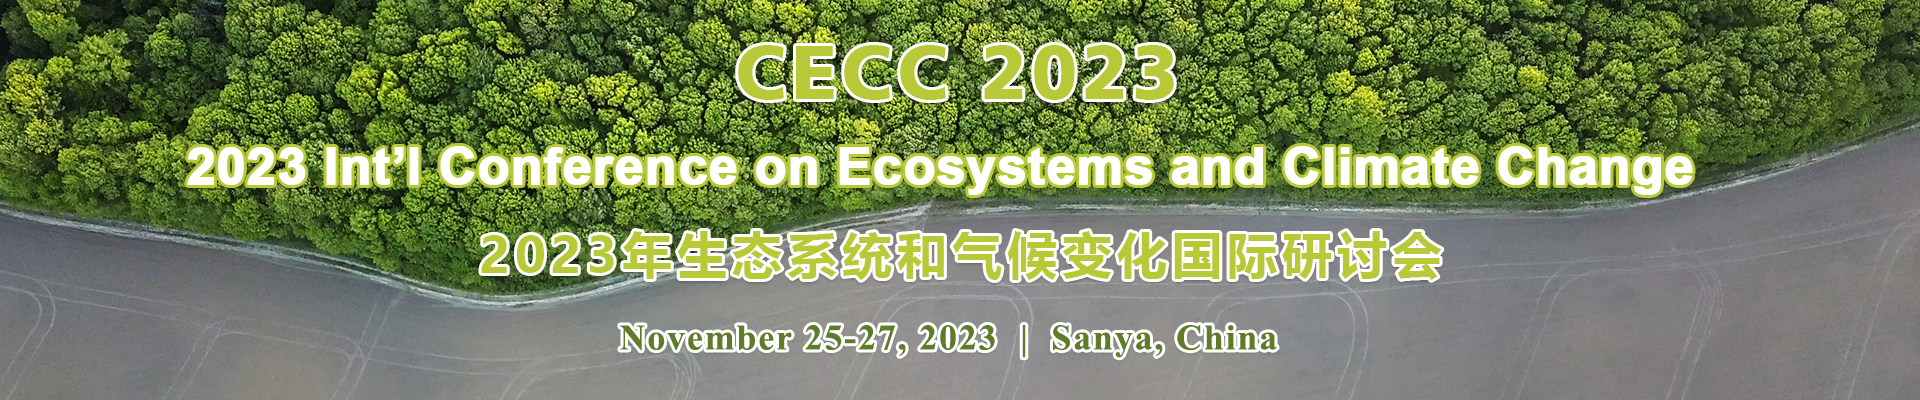 2023 Int’l Conference on Ecosystems and Climate Change (CECC 2023) 